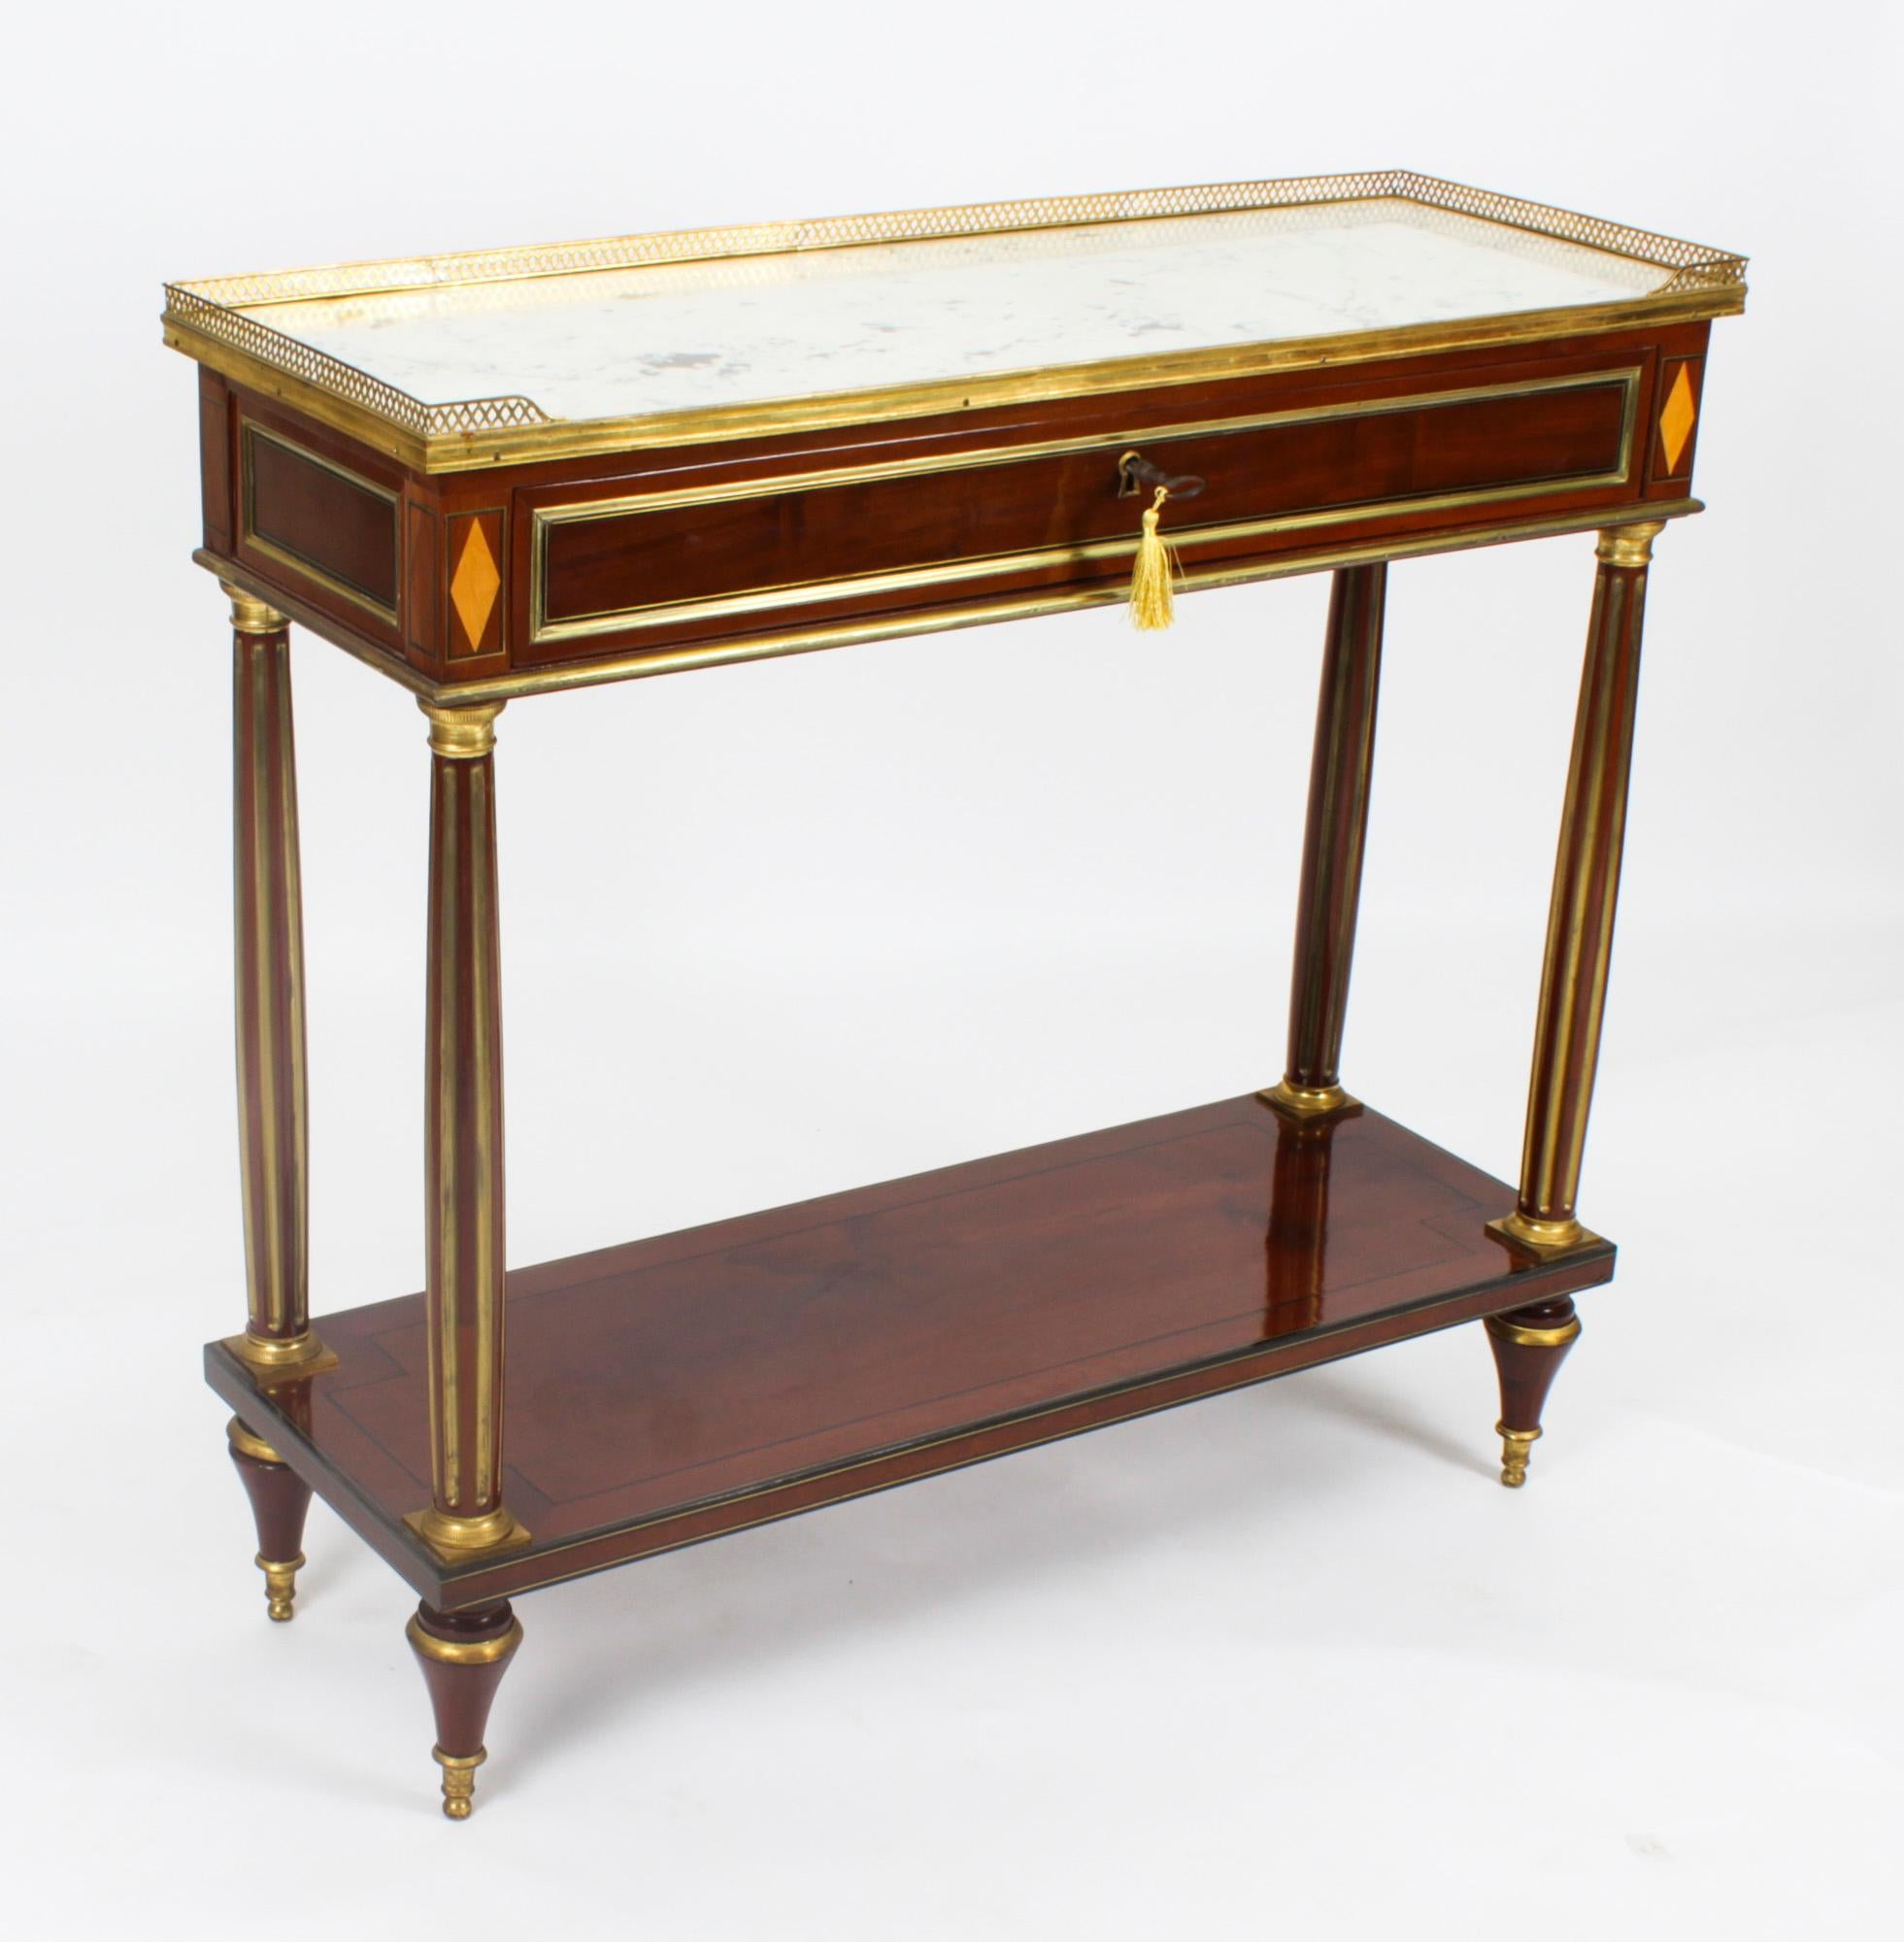 This is a fine antique pair of Russian Neo-classical marble topped and ormolu mounted mahogany console tables, dating from Circa 1840.
 
The Gris St Anne marble tops feature decorative three quarter pieced brass galleries over frieze drawers